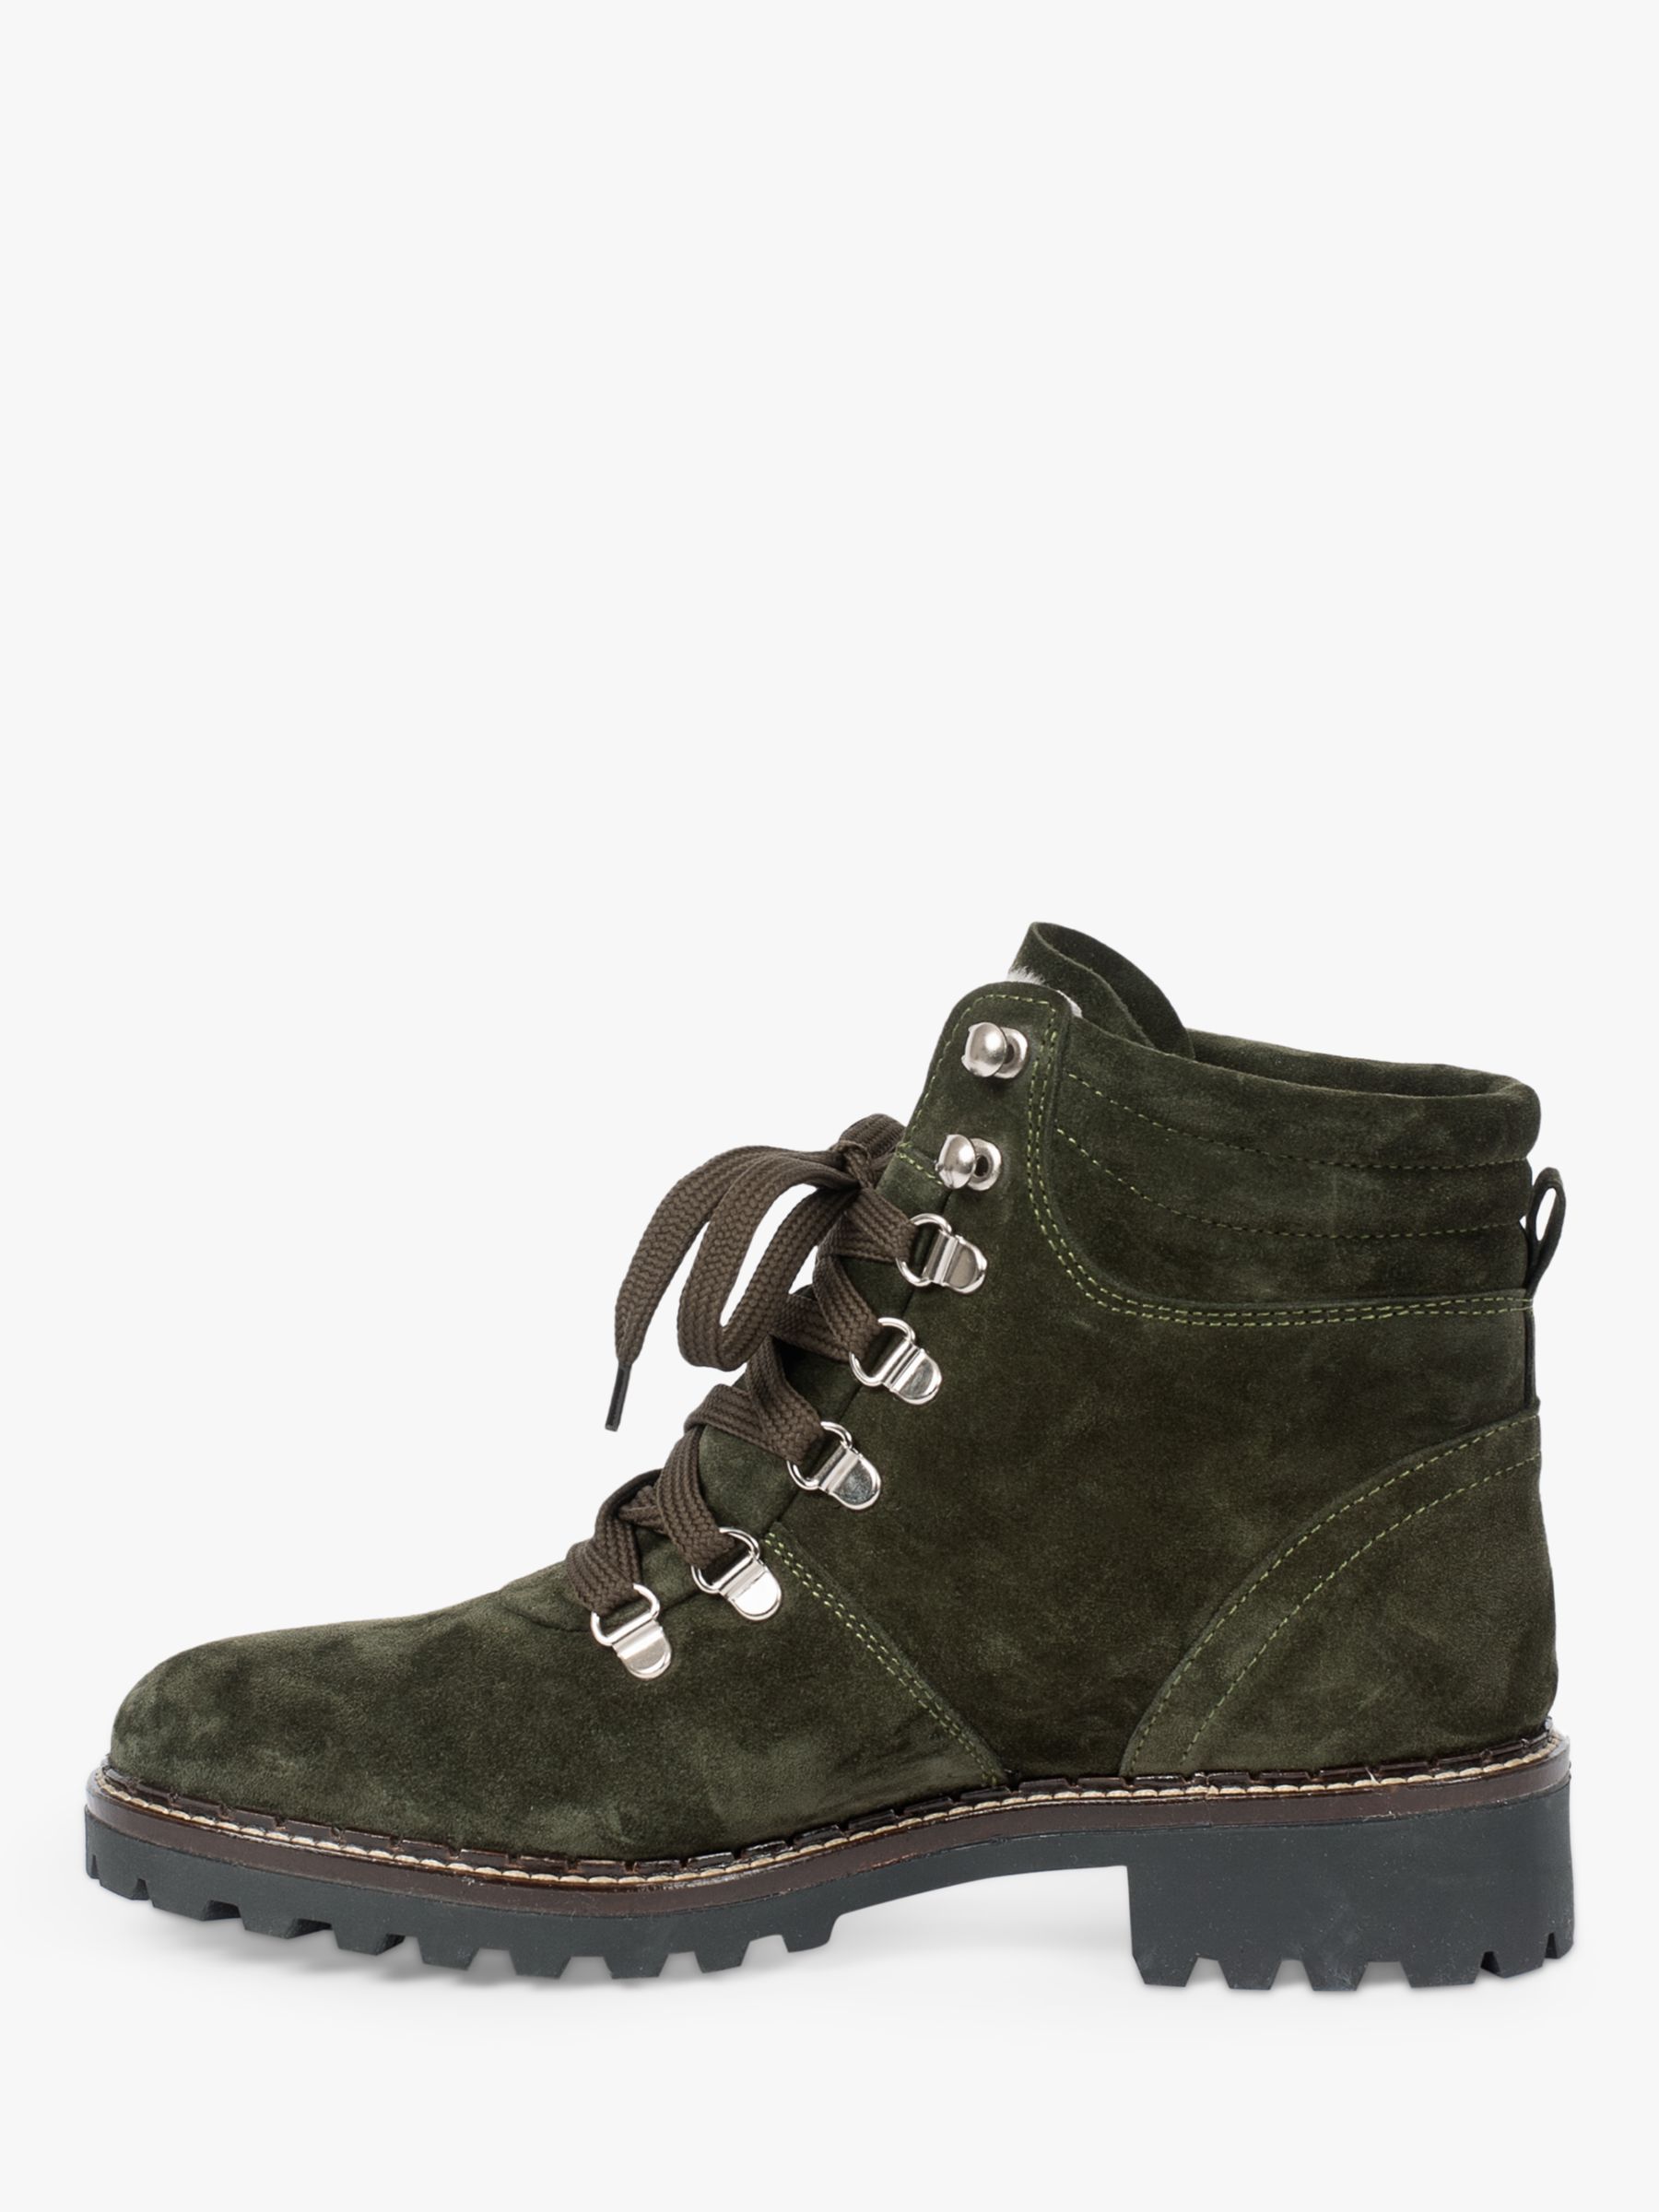 Celtic & Co. Suede Lace Up Hiker Boots, Olive at John Lewis & Partners